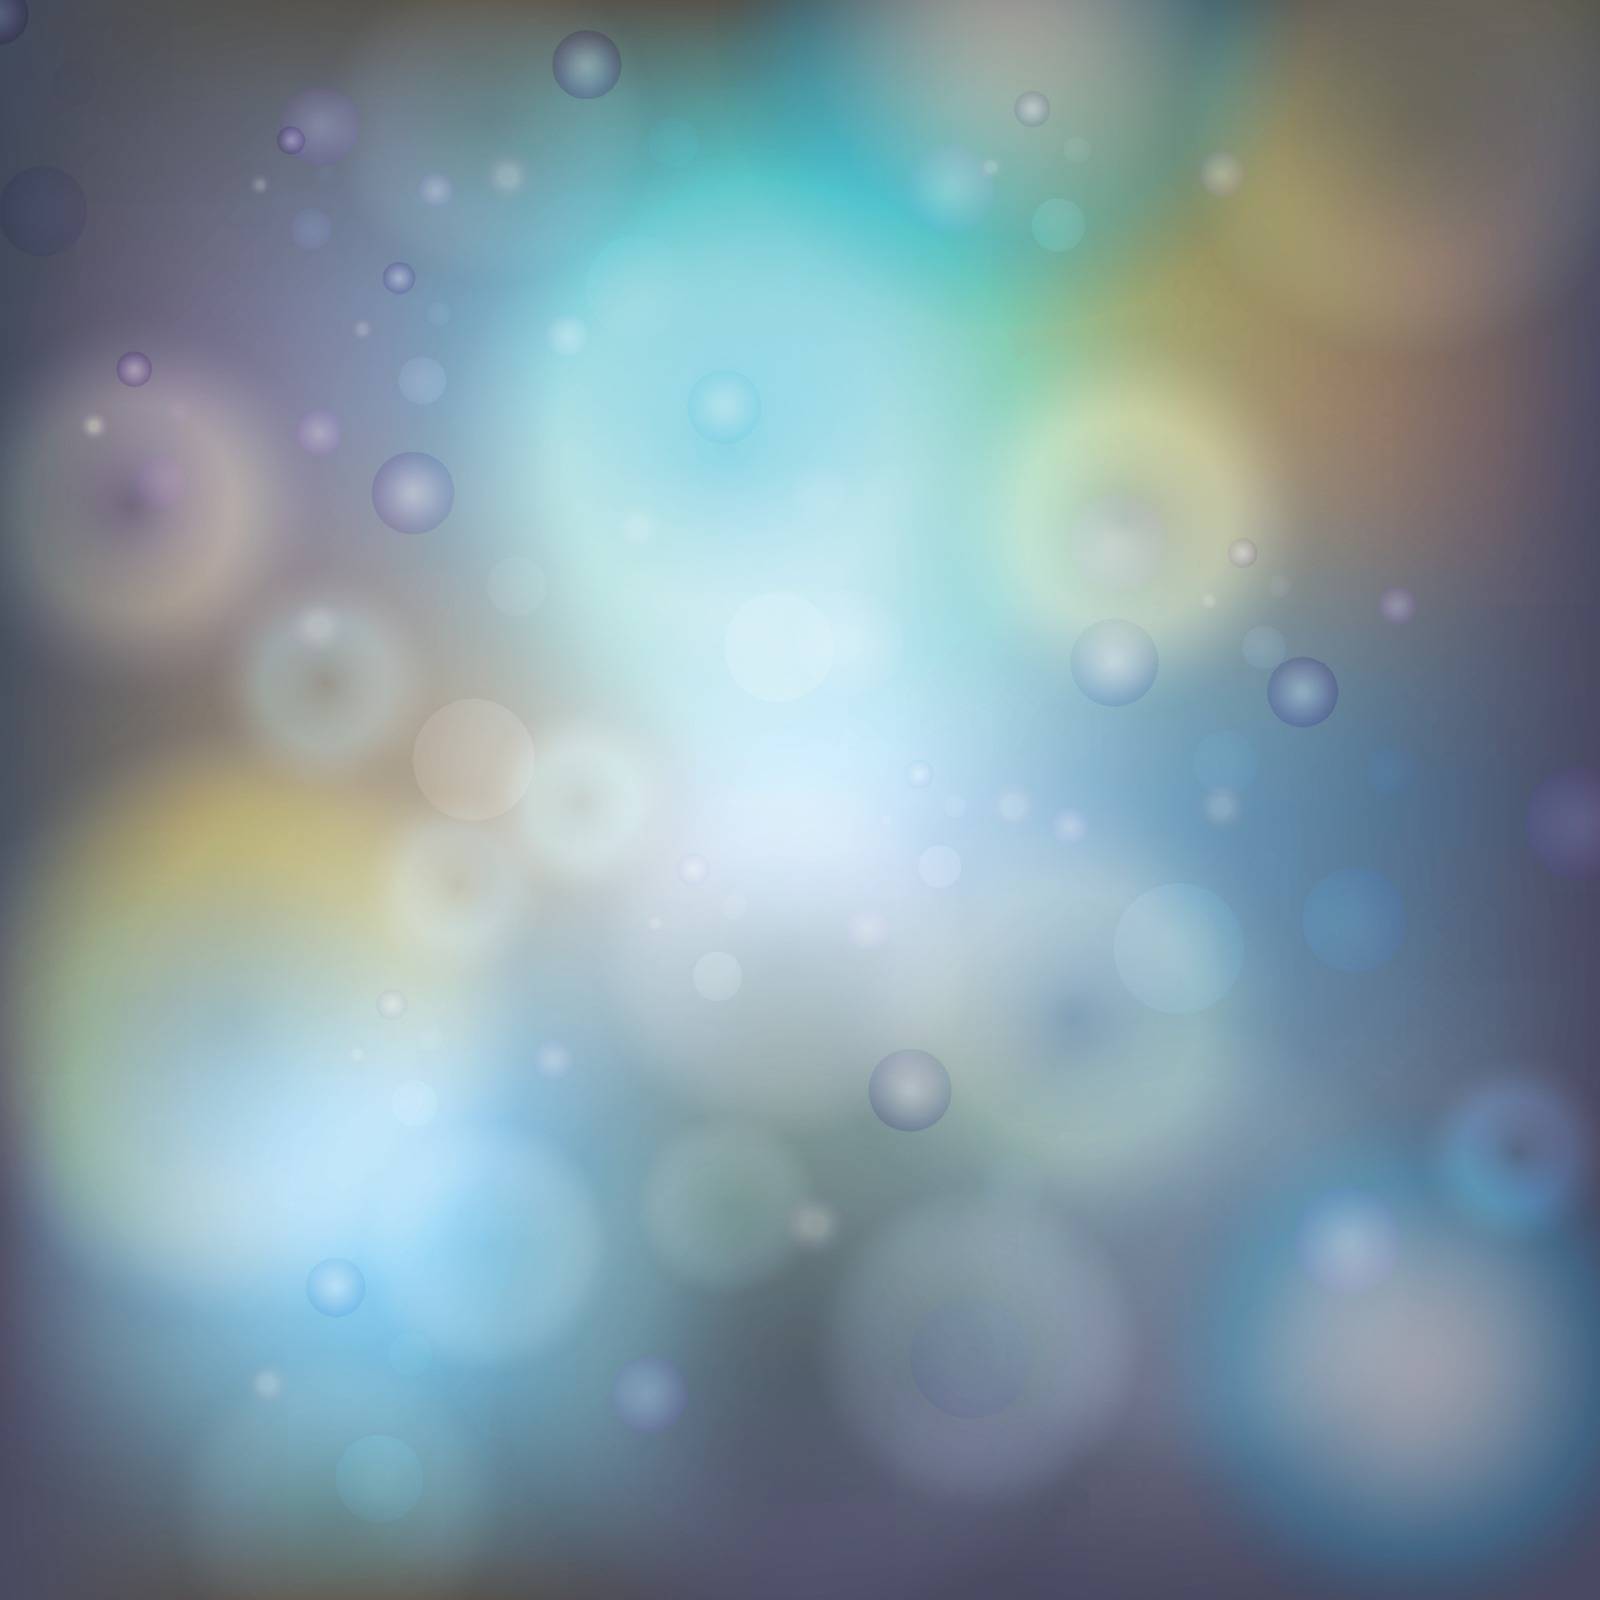 Bubbles on abstract background by dontpoke